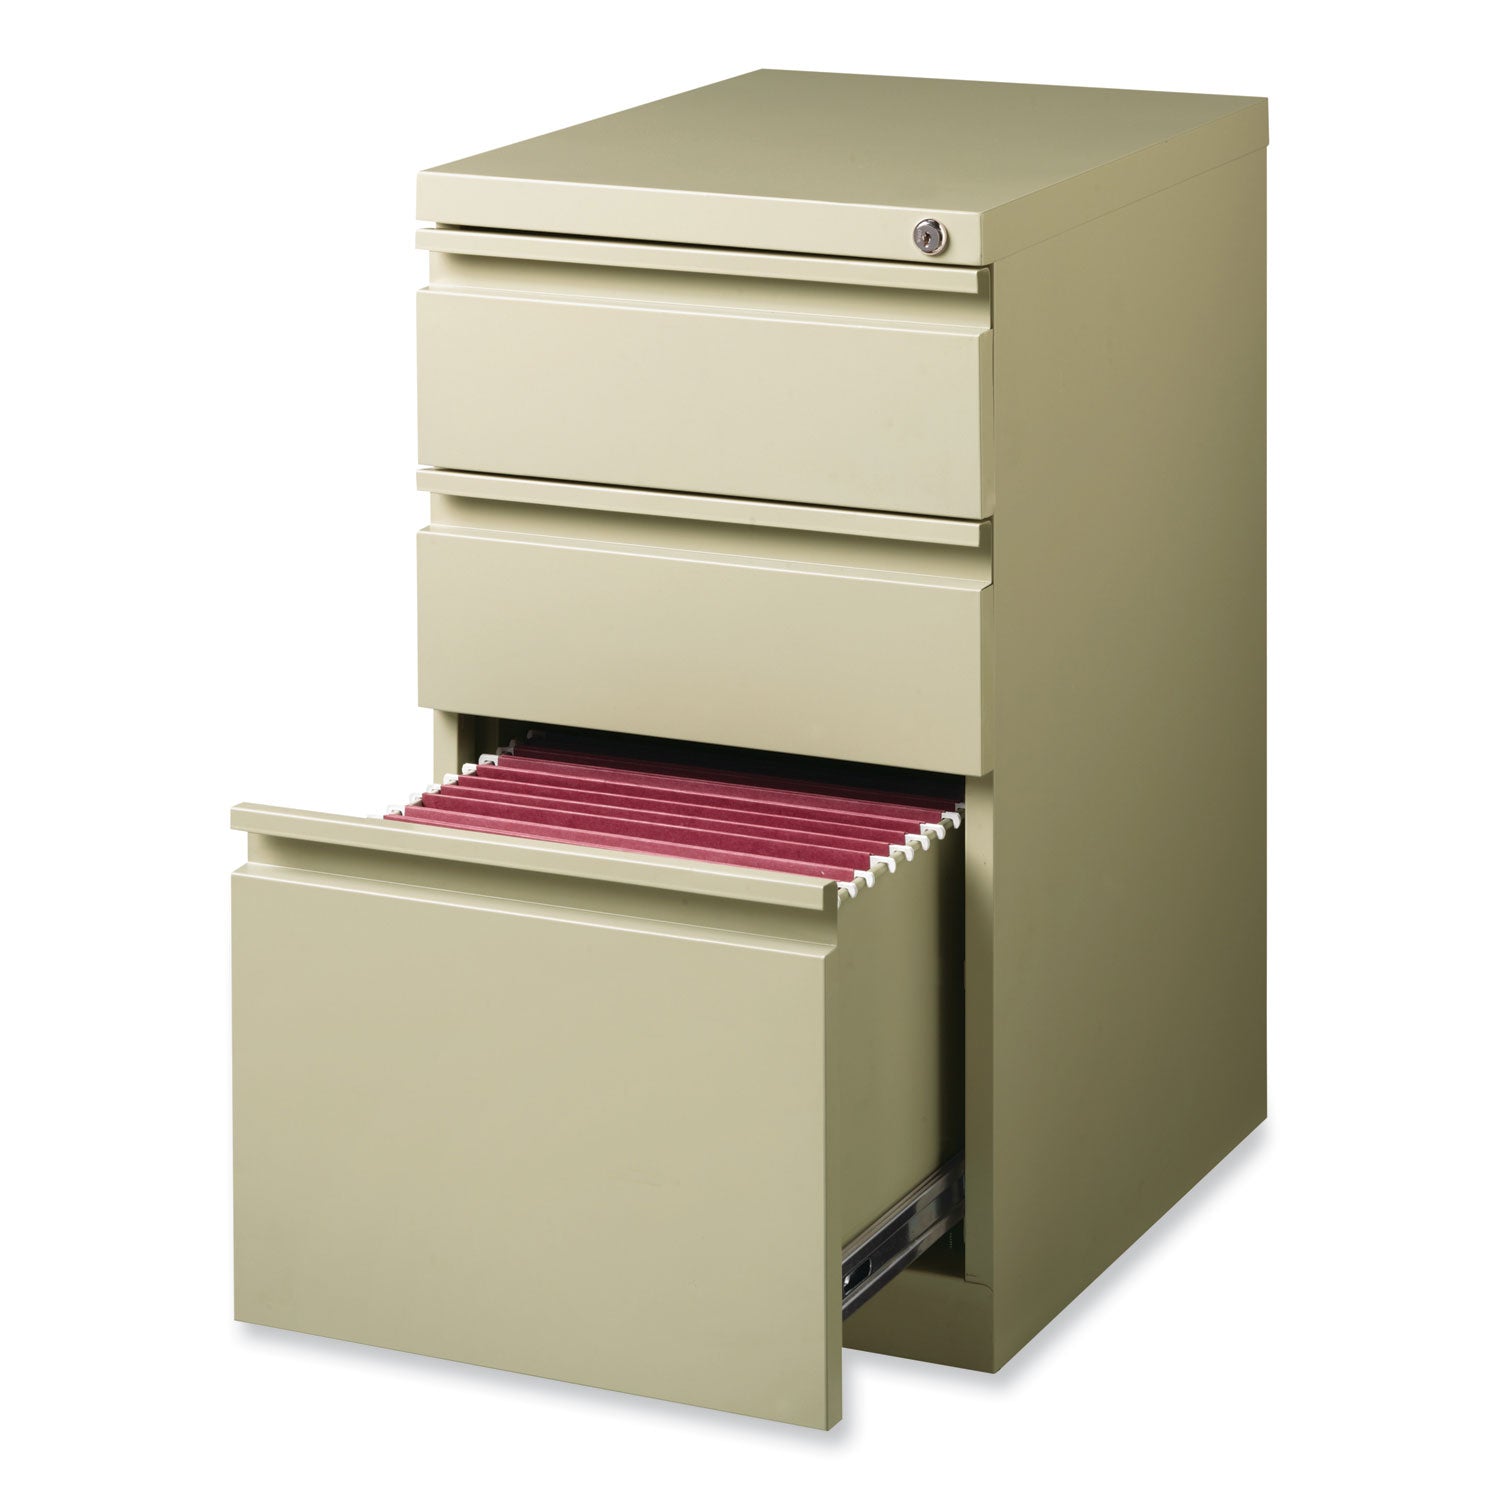 full-width-pull-20-deep-mobile-pedestal-file-box-box-file-letter-putty-15-x-1988-x-2775-ships-in-4-6-business-days_hid18574 - 4